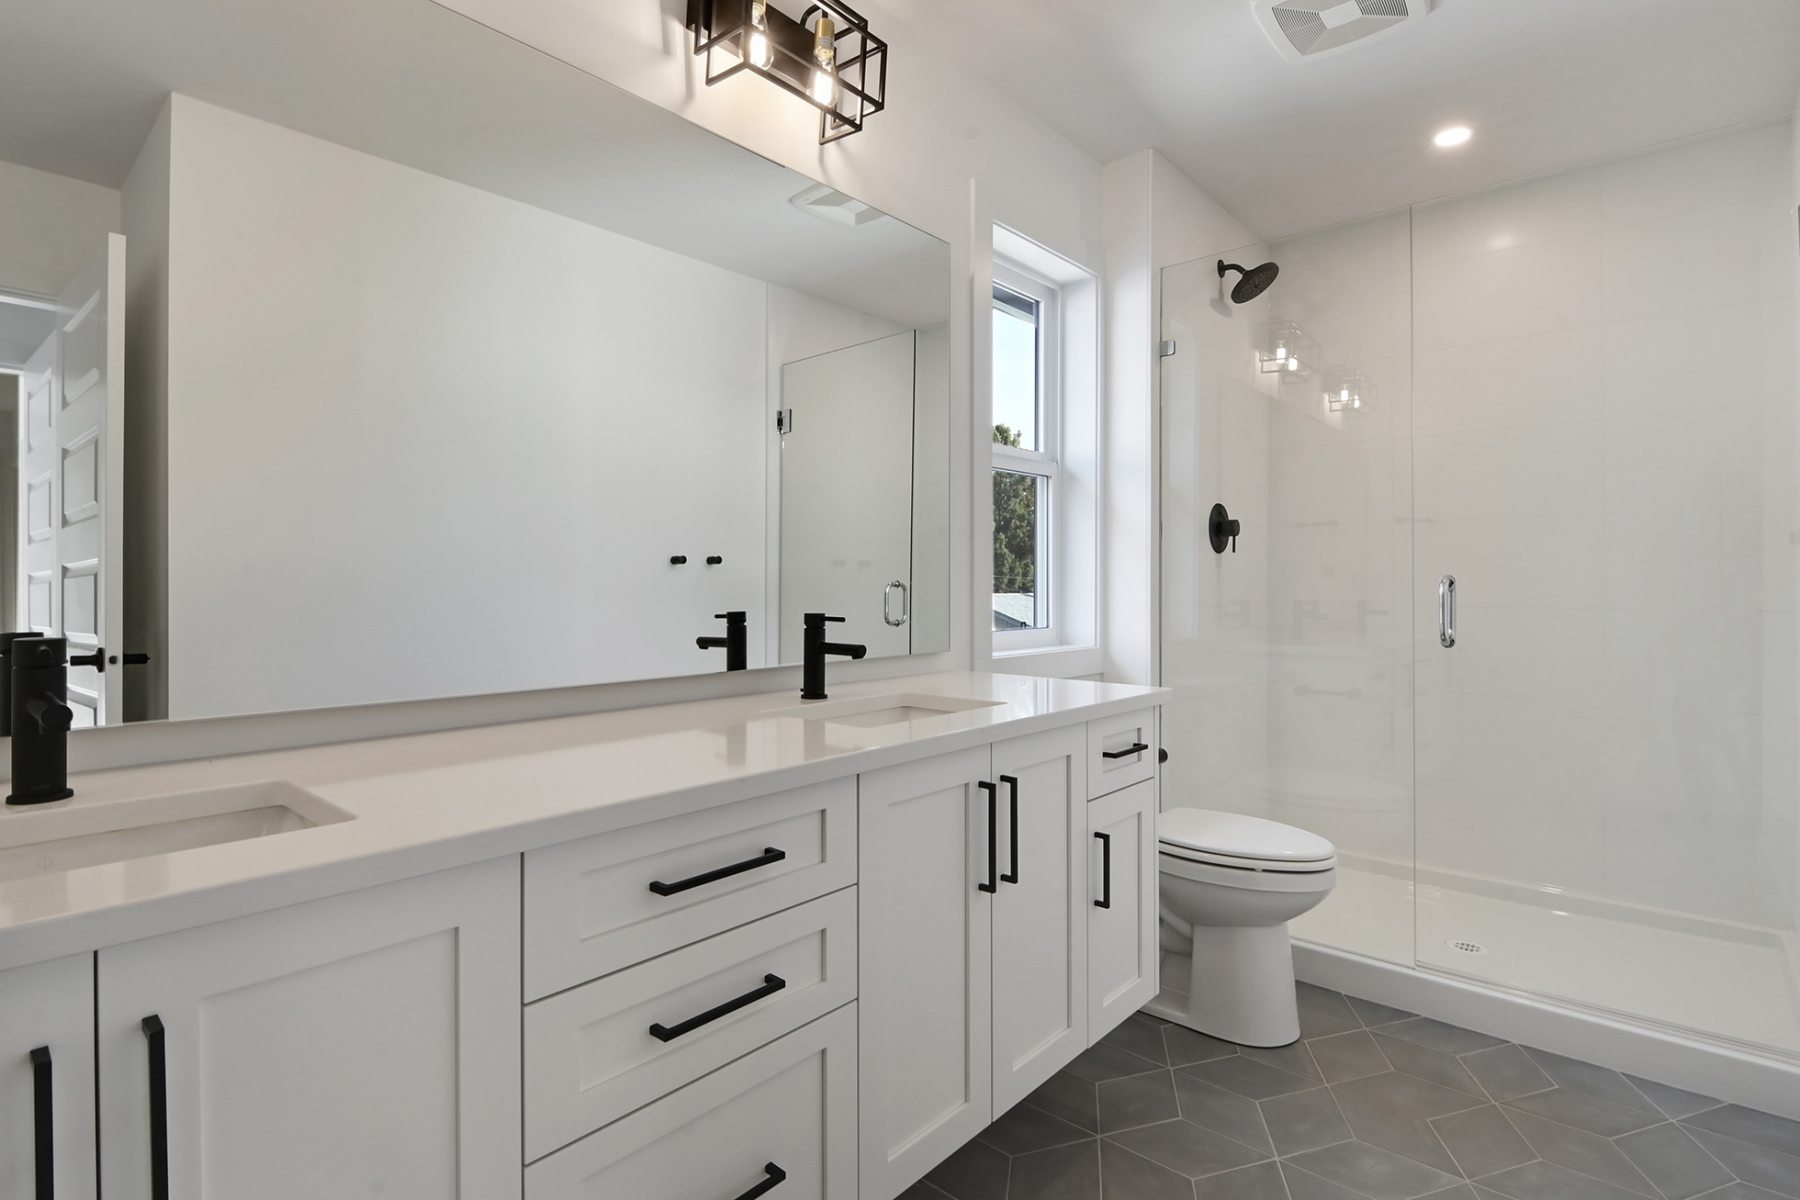 1_harmony_homes_patterson_ave_infill_project_bath-closet_gallery_image_20